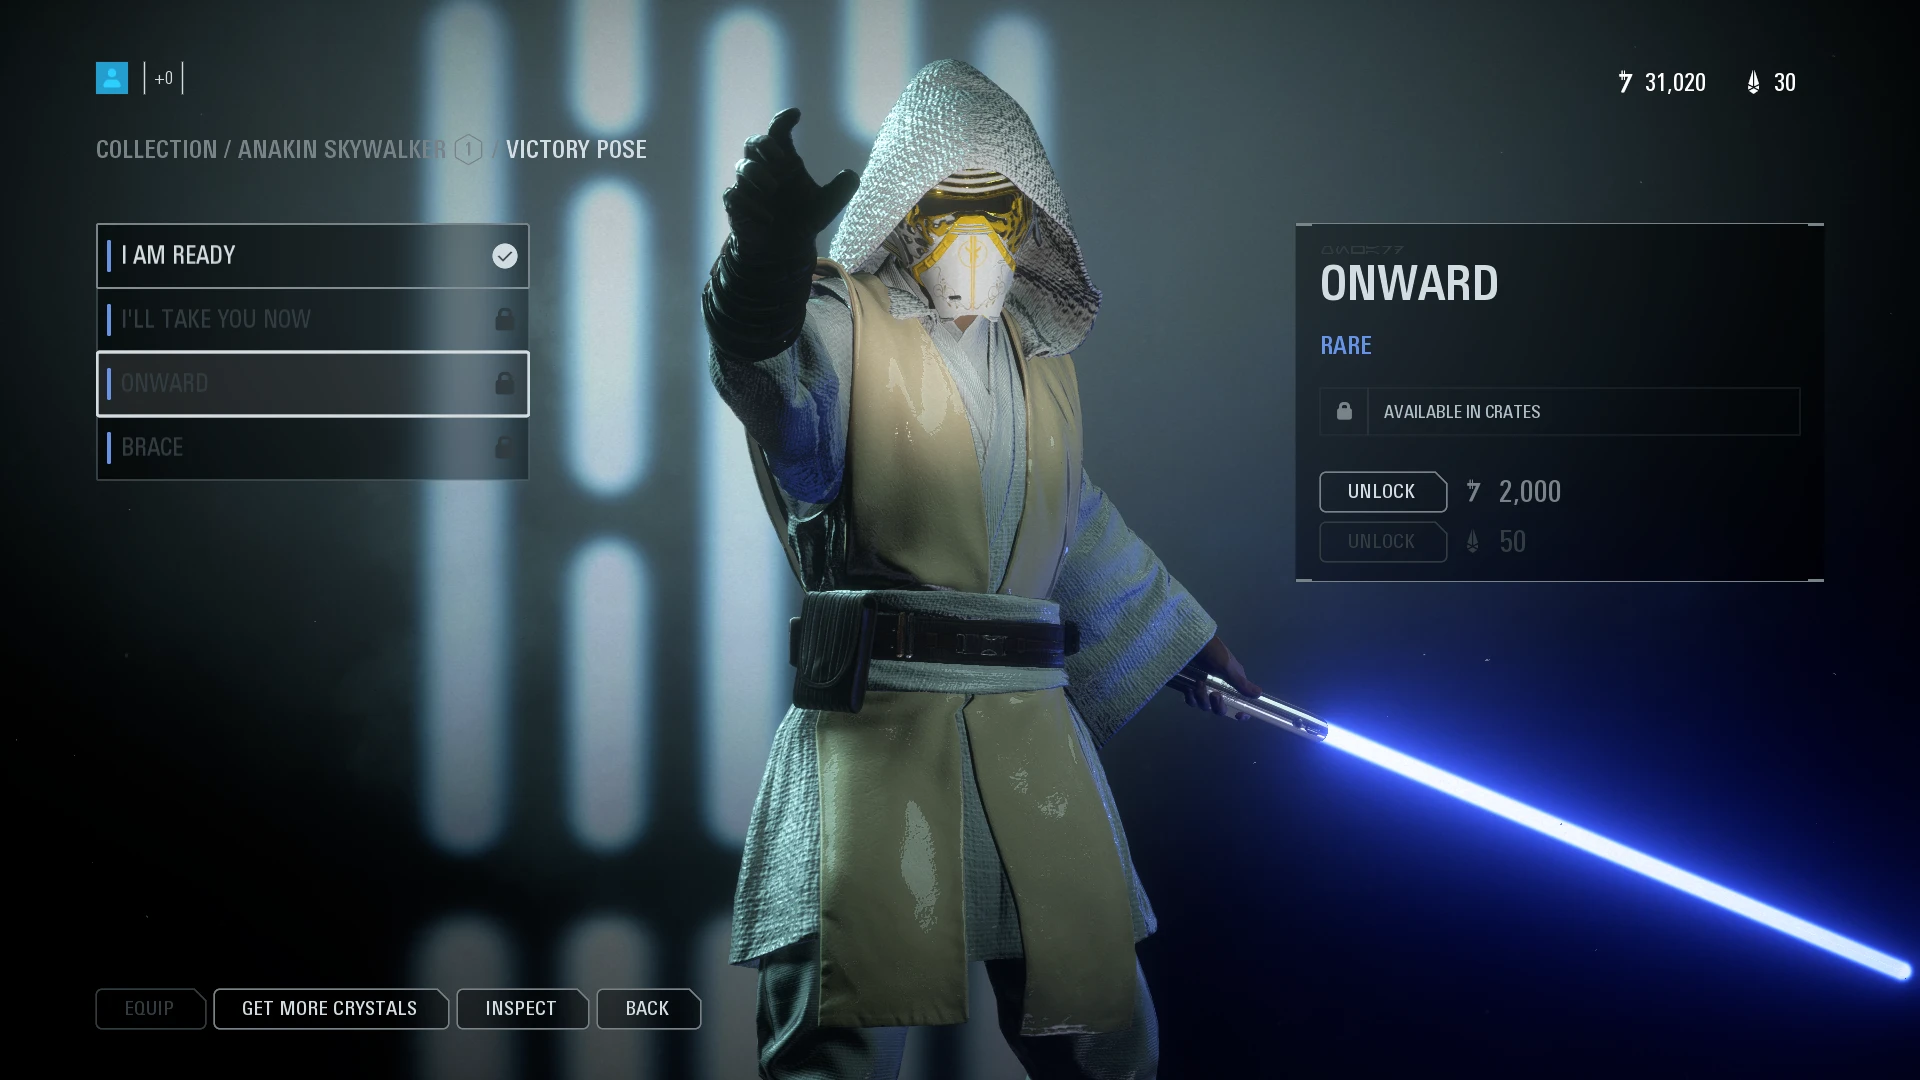 how to install battlefront 2 mods steam